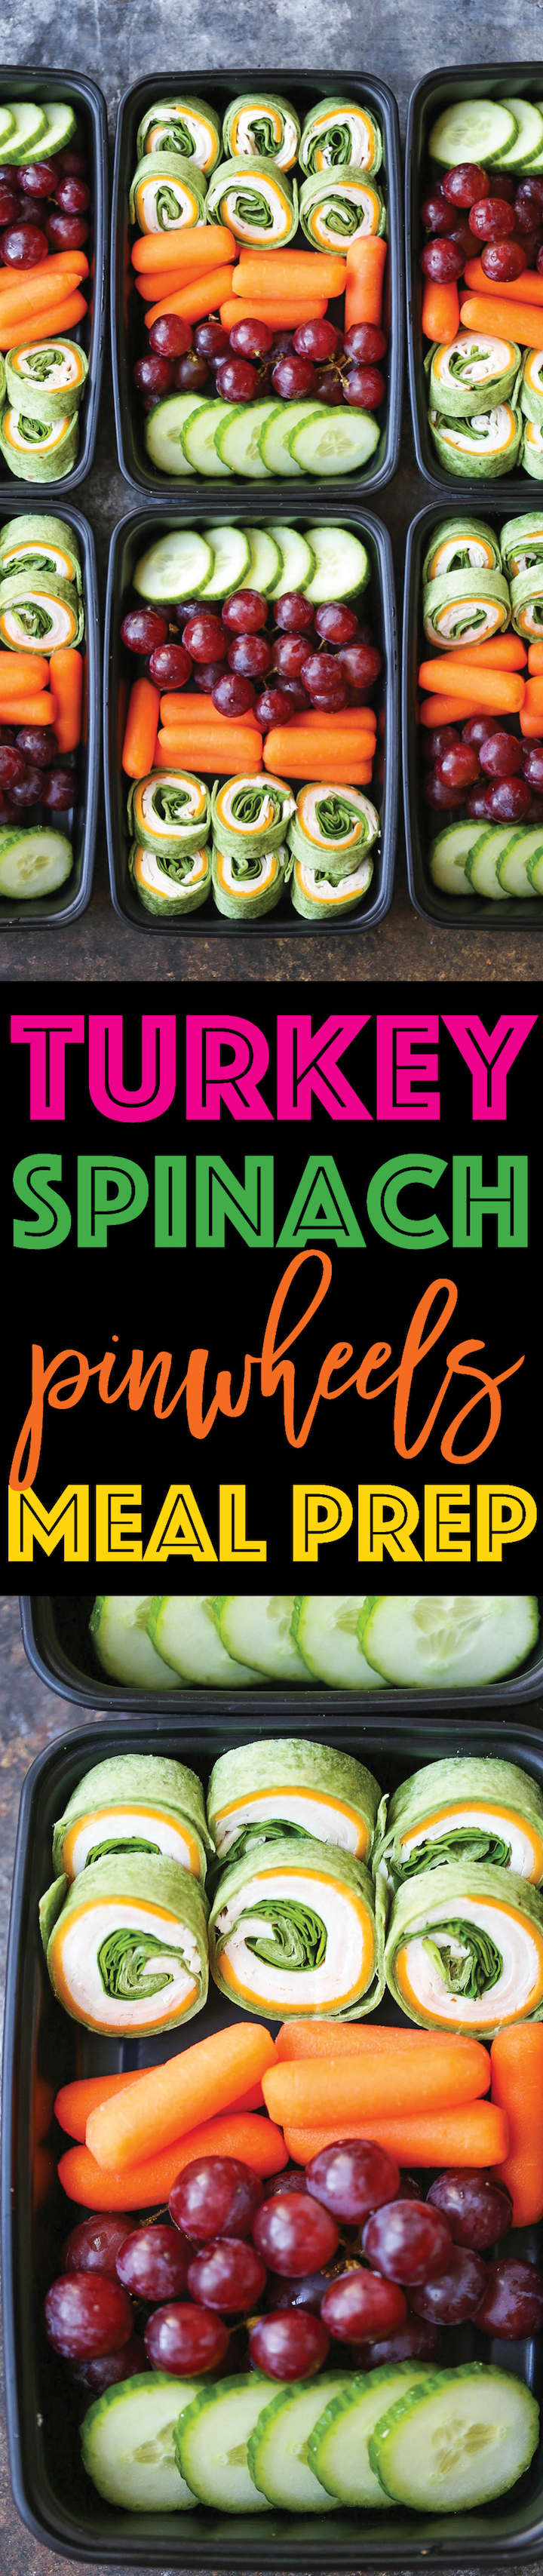 Turkey Spinach Pinwheels Meal Prep - Prep your lunches for the week with these turkey spinach and cheese pinwheels! No more overpriced snacks and lunches!!!